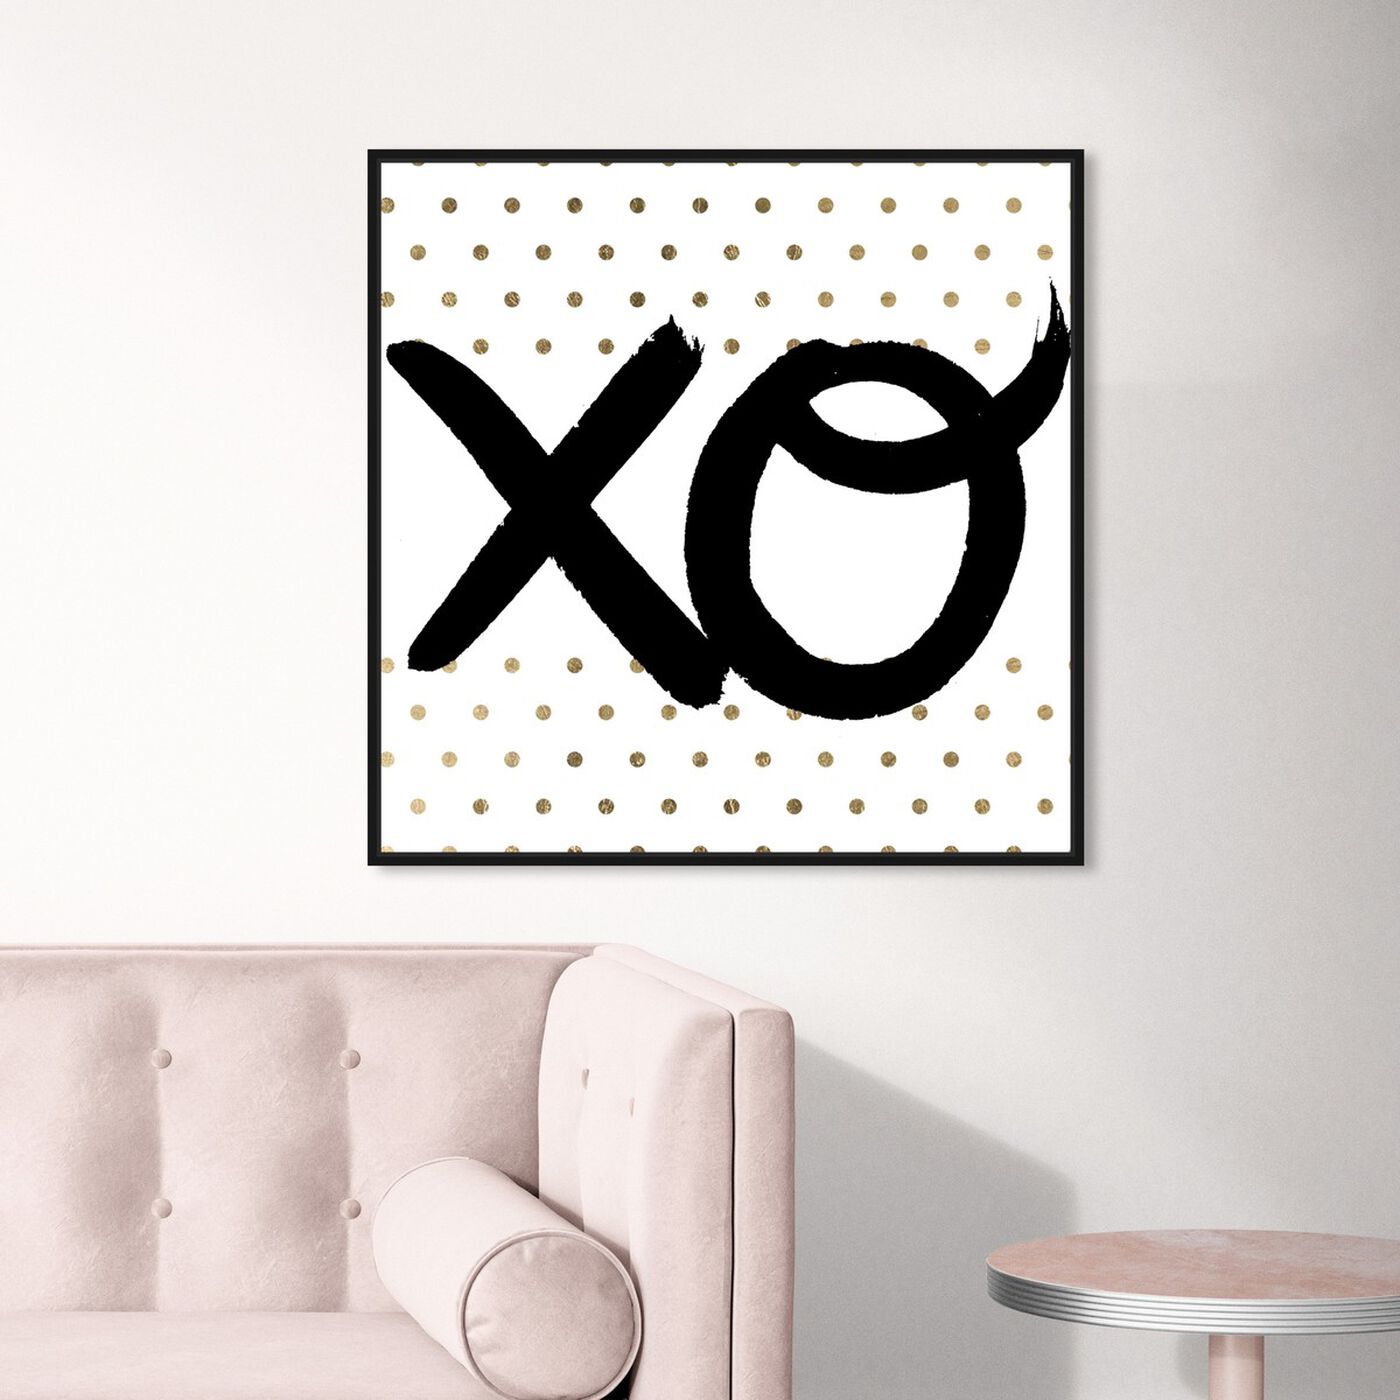 Hanging view of XO featuring typography and quotes and signs art.